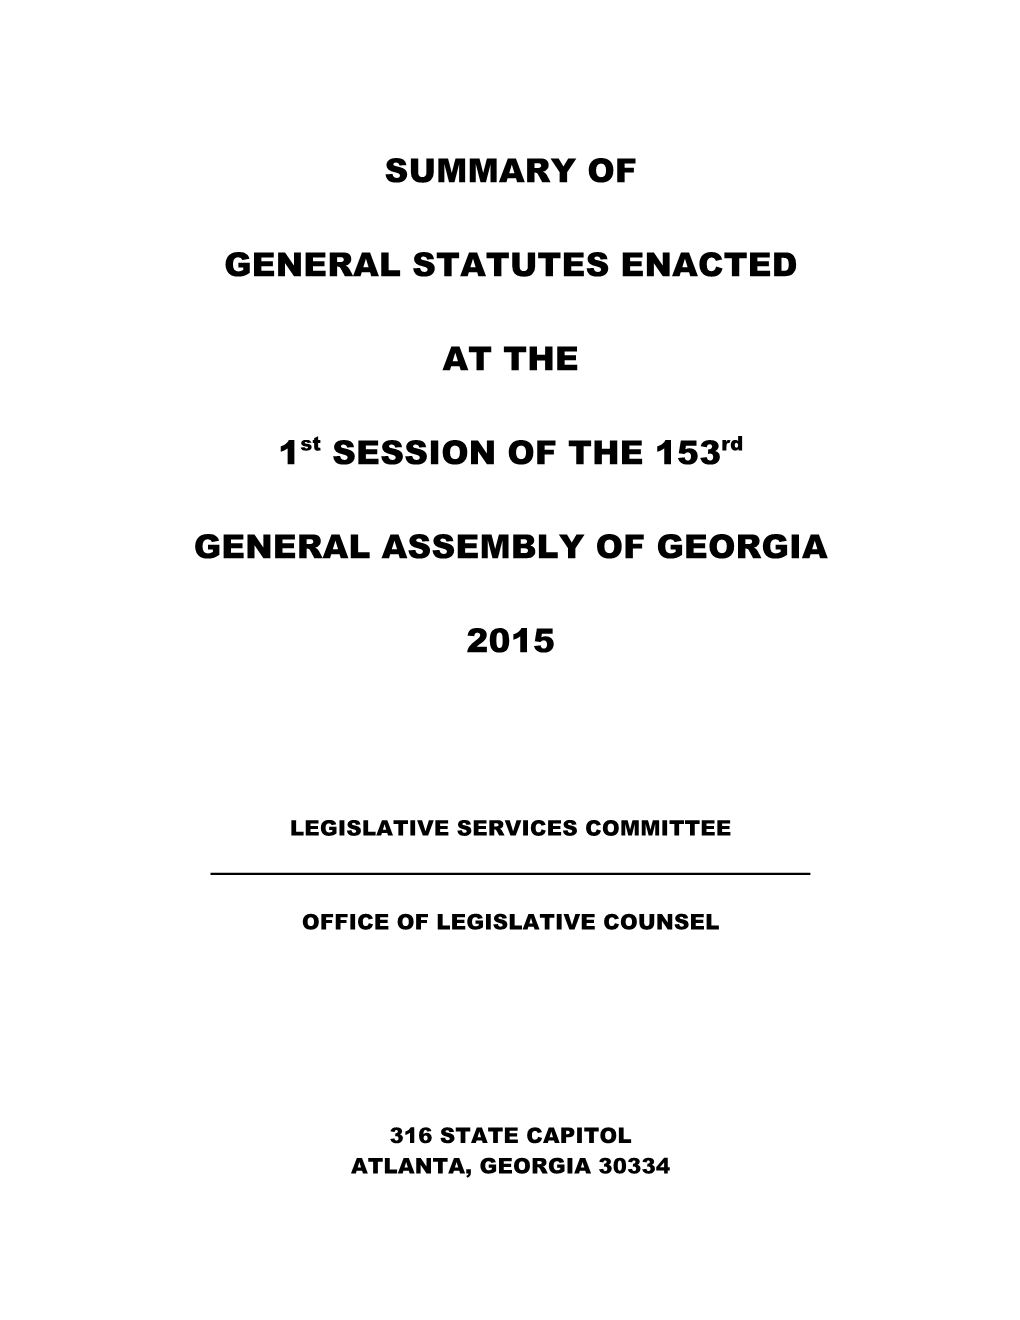 SUMMARY of GENERAL STATUTES ENACTED at the 1St SESSION